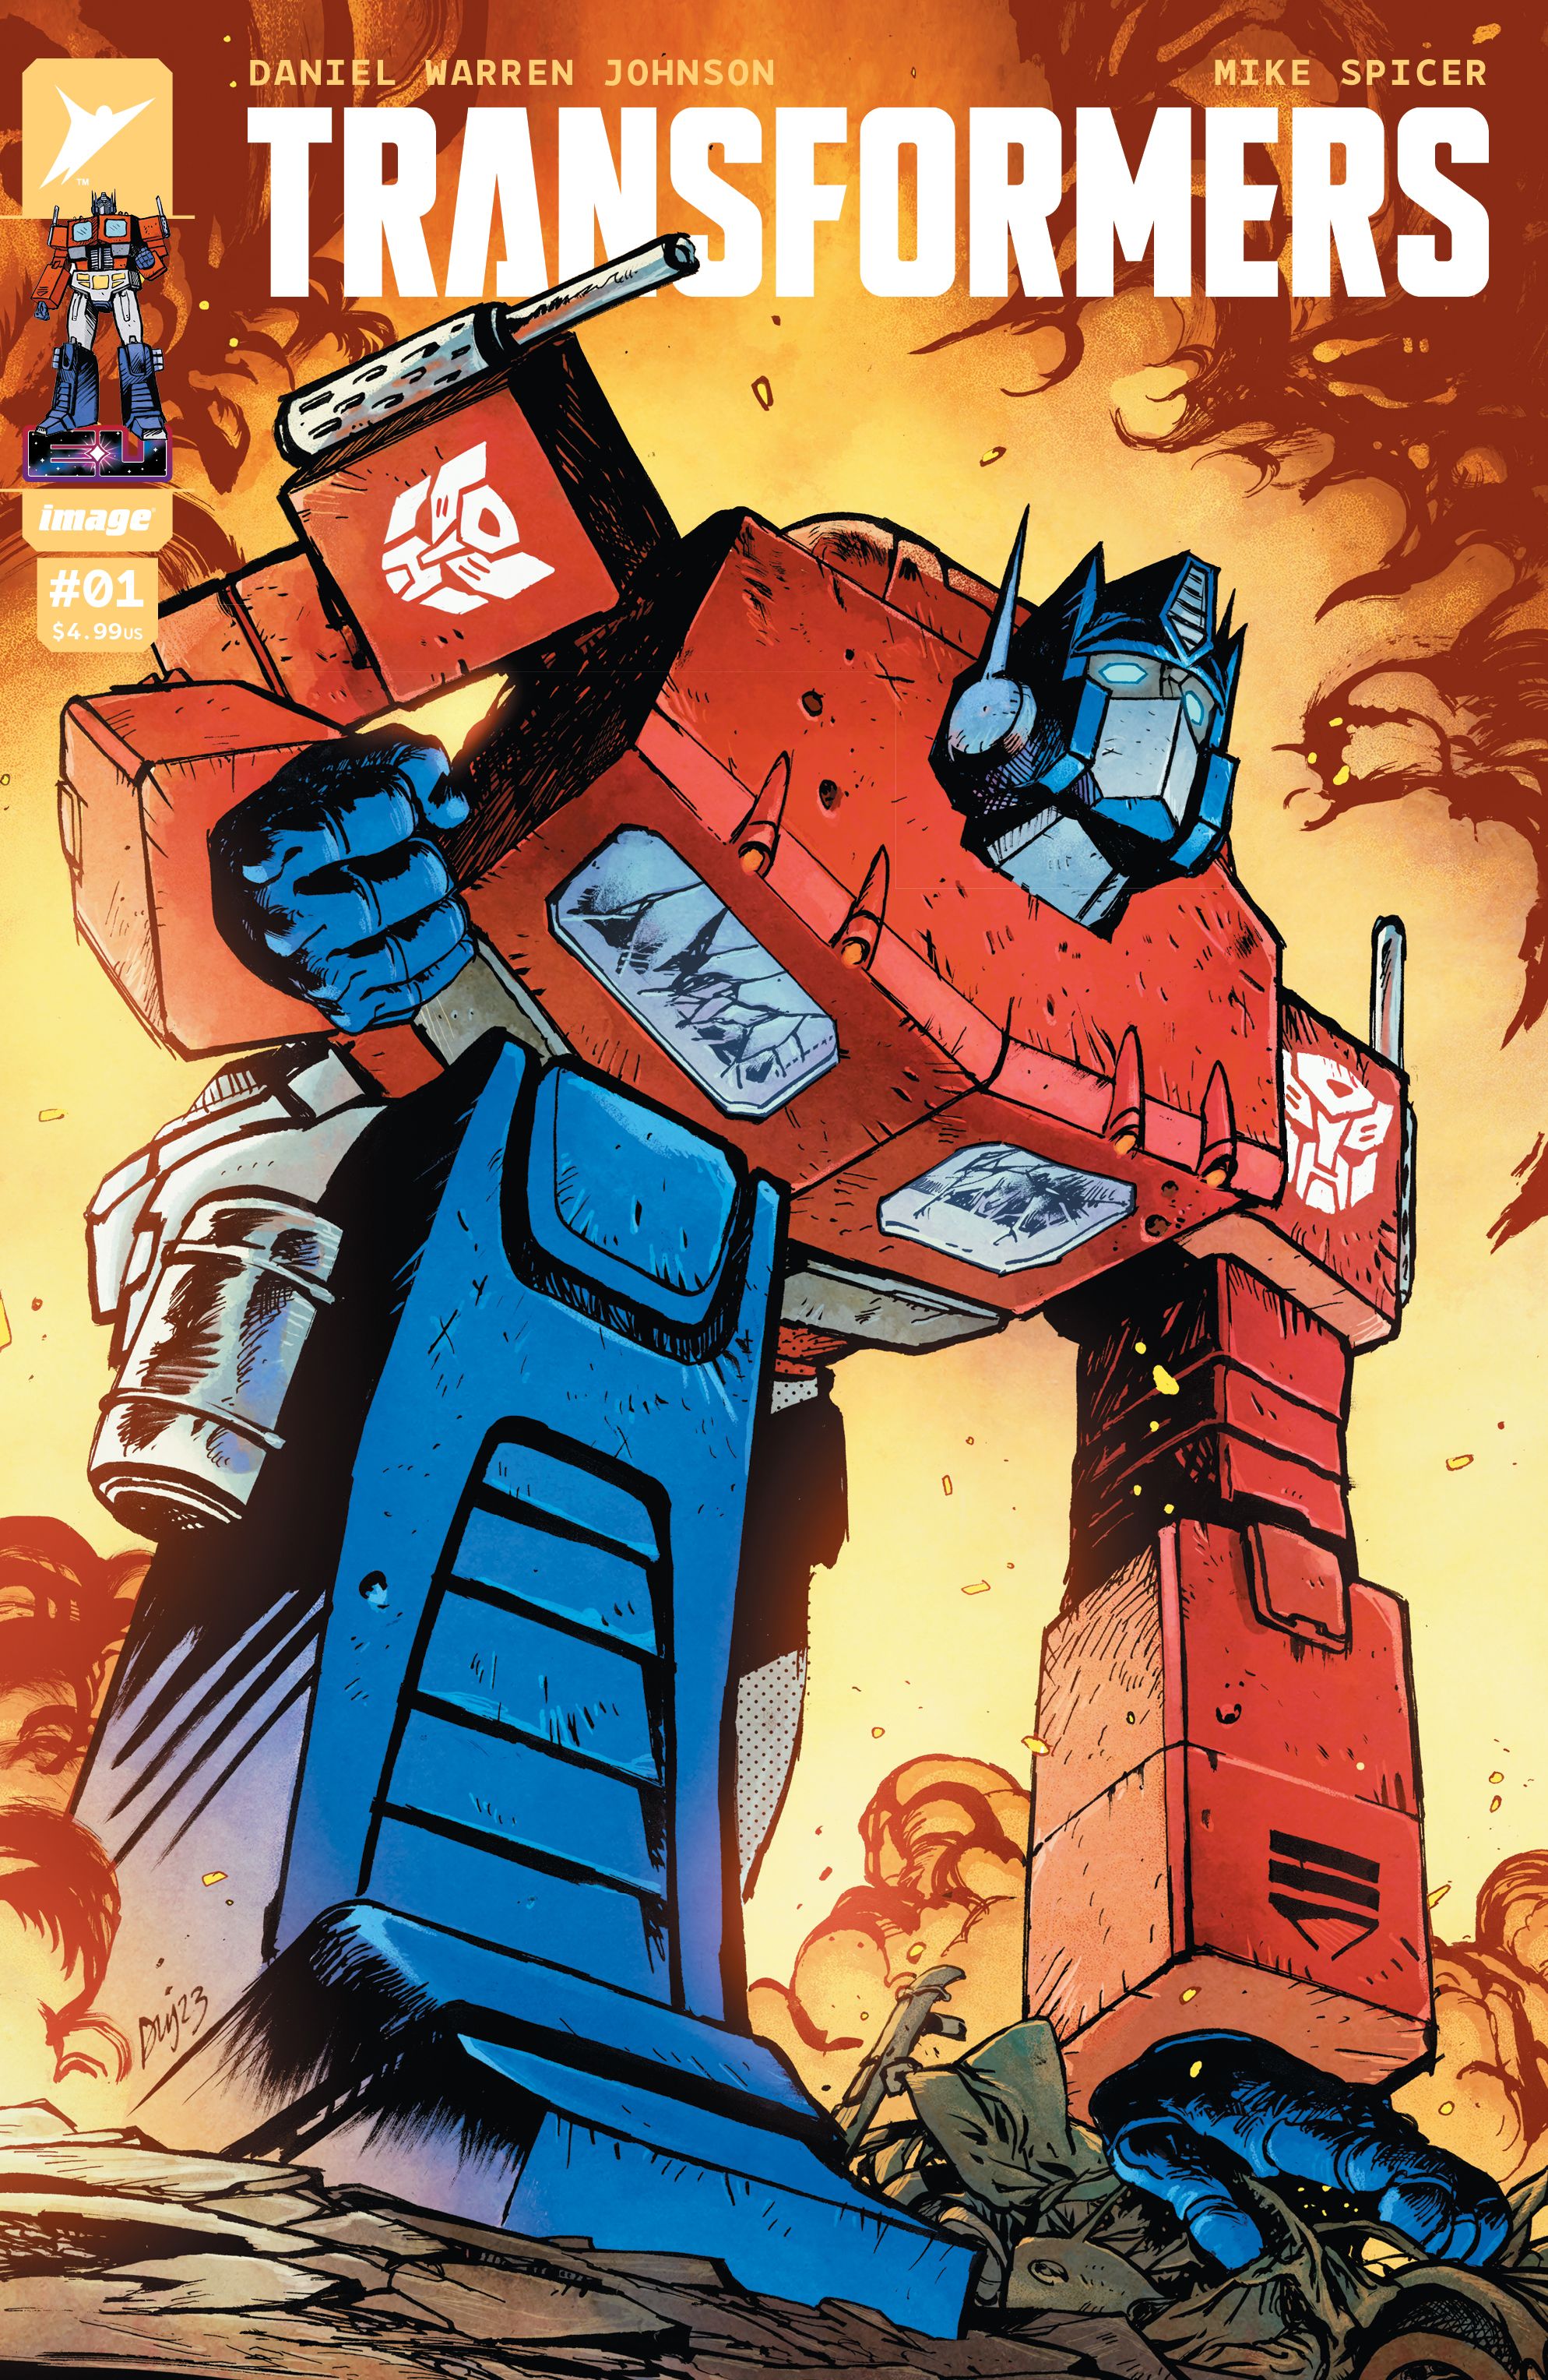 Optimus Prime on the cover of Transformers #1